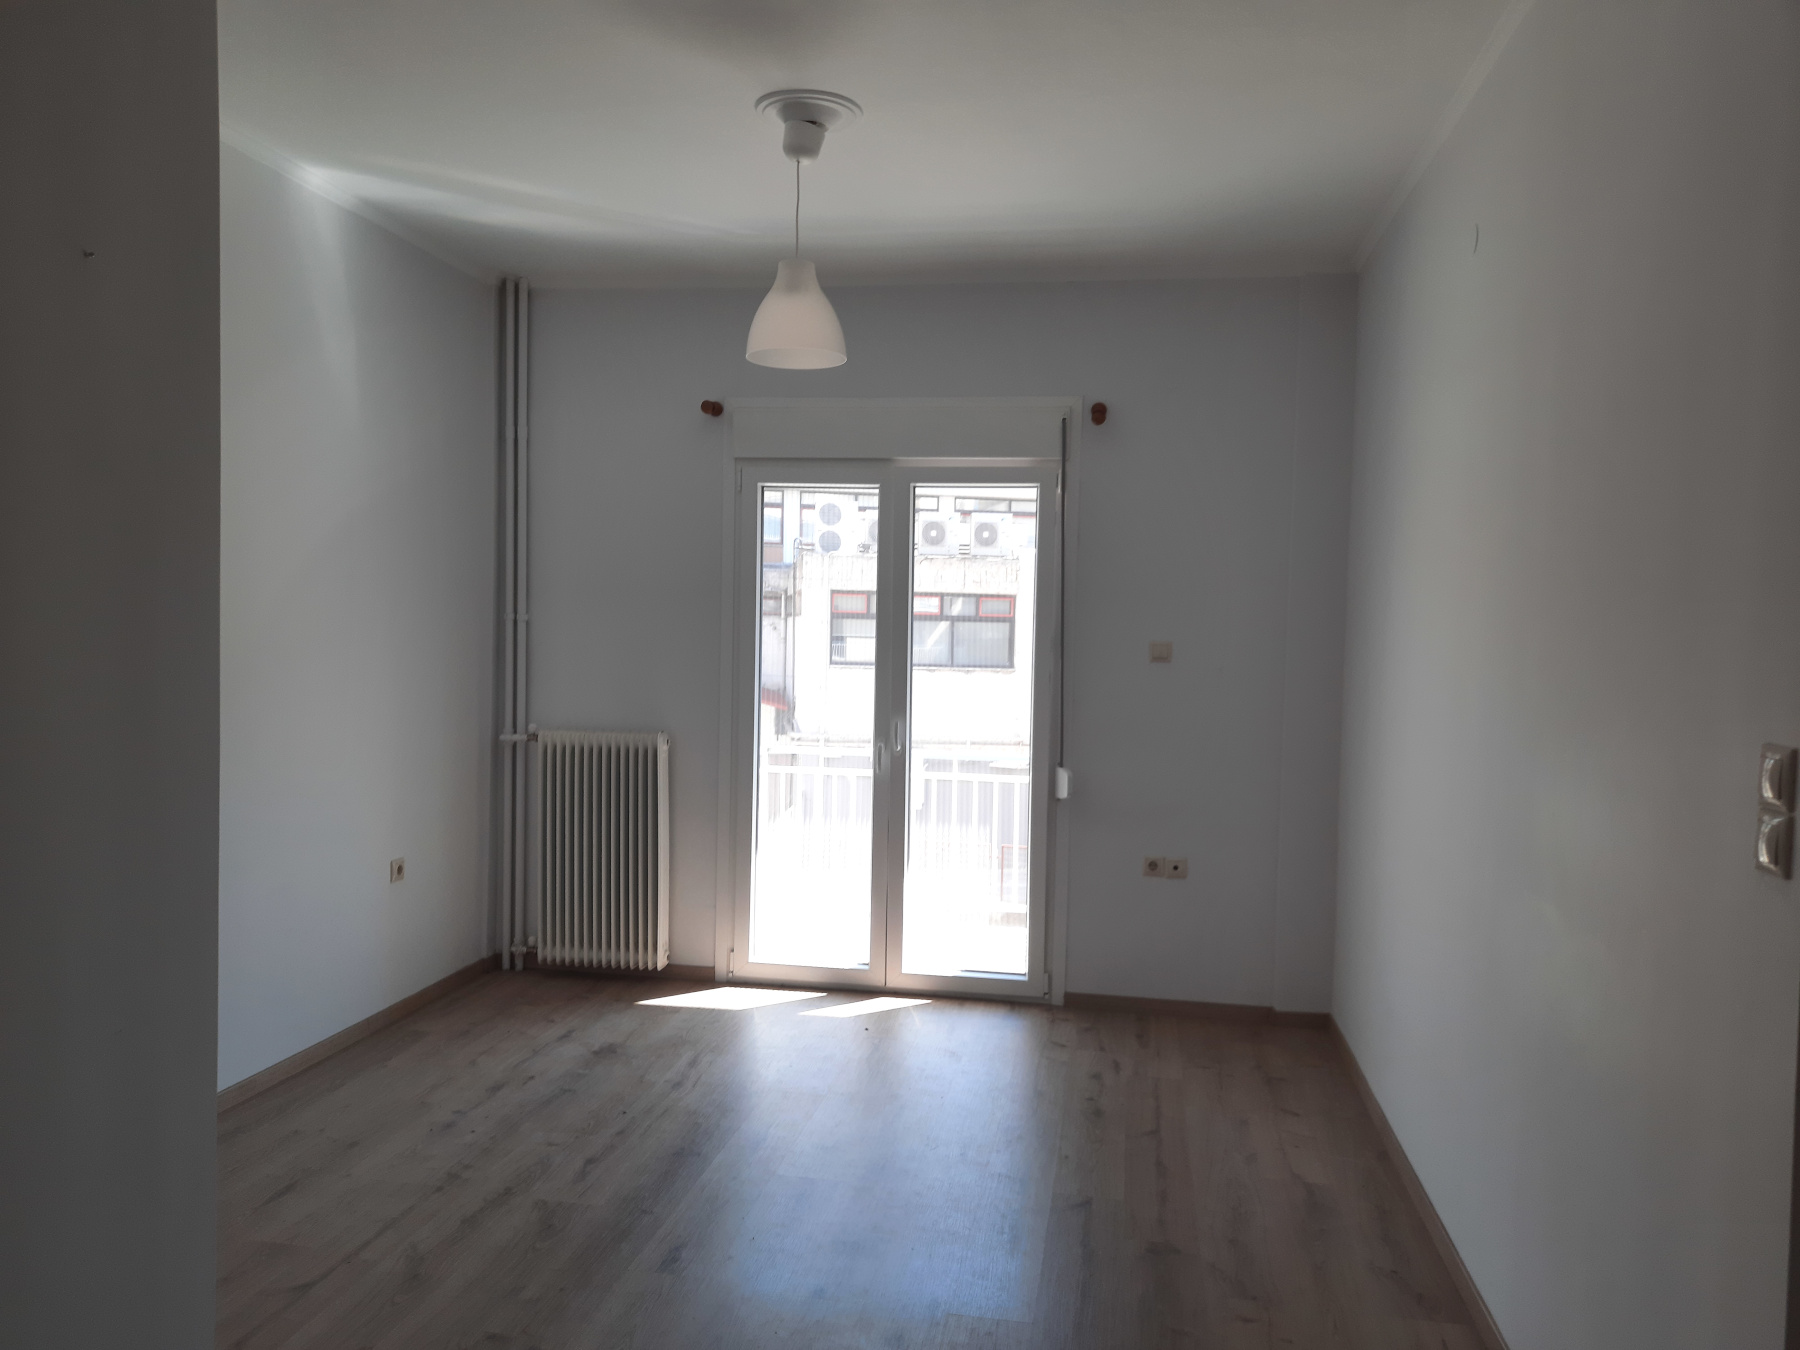 For rent 2 bedrooms apartment 70 sq.m. 1st floor fully renovated in 2019 in Pargis square in the center of Ioannina